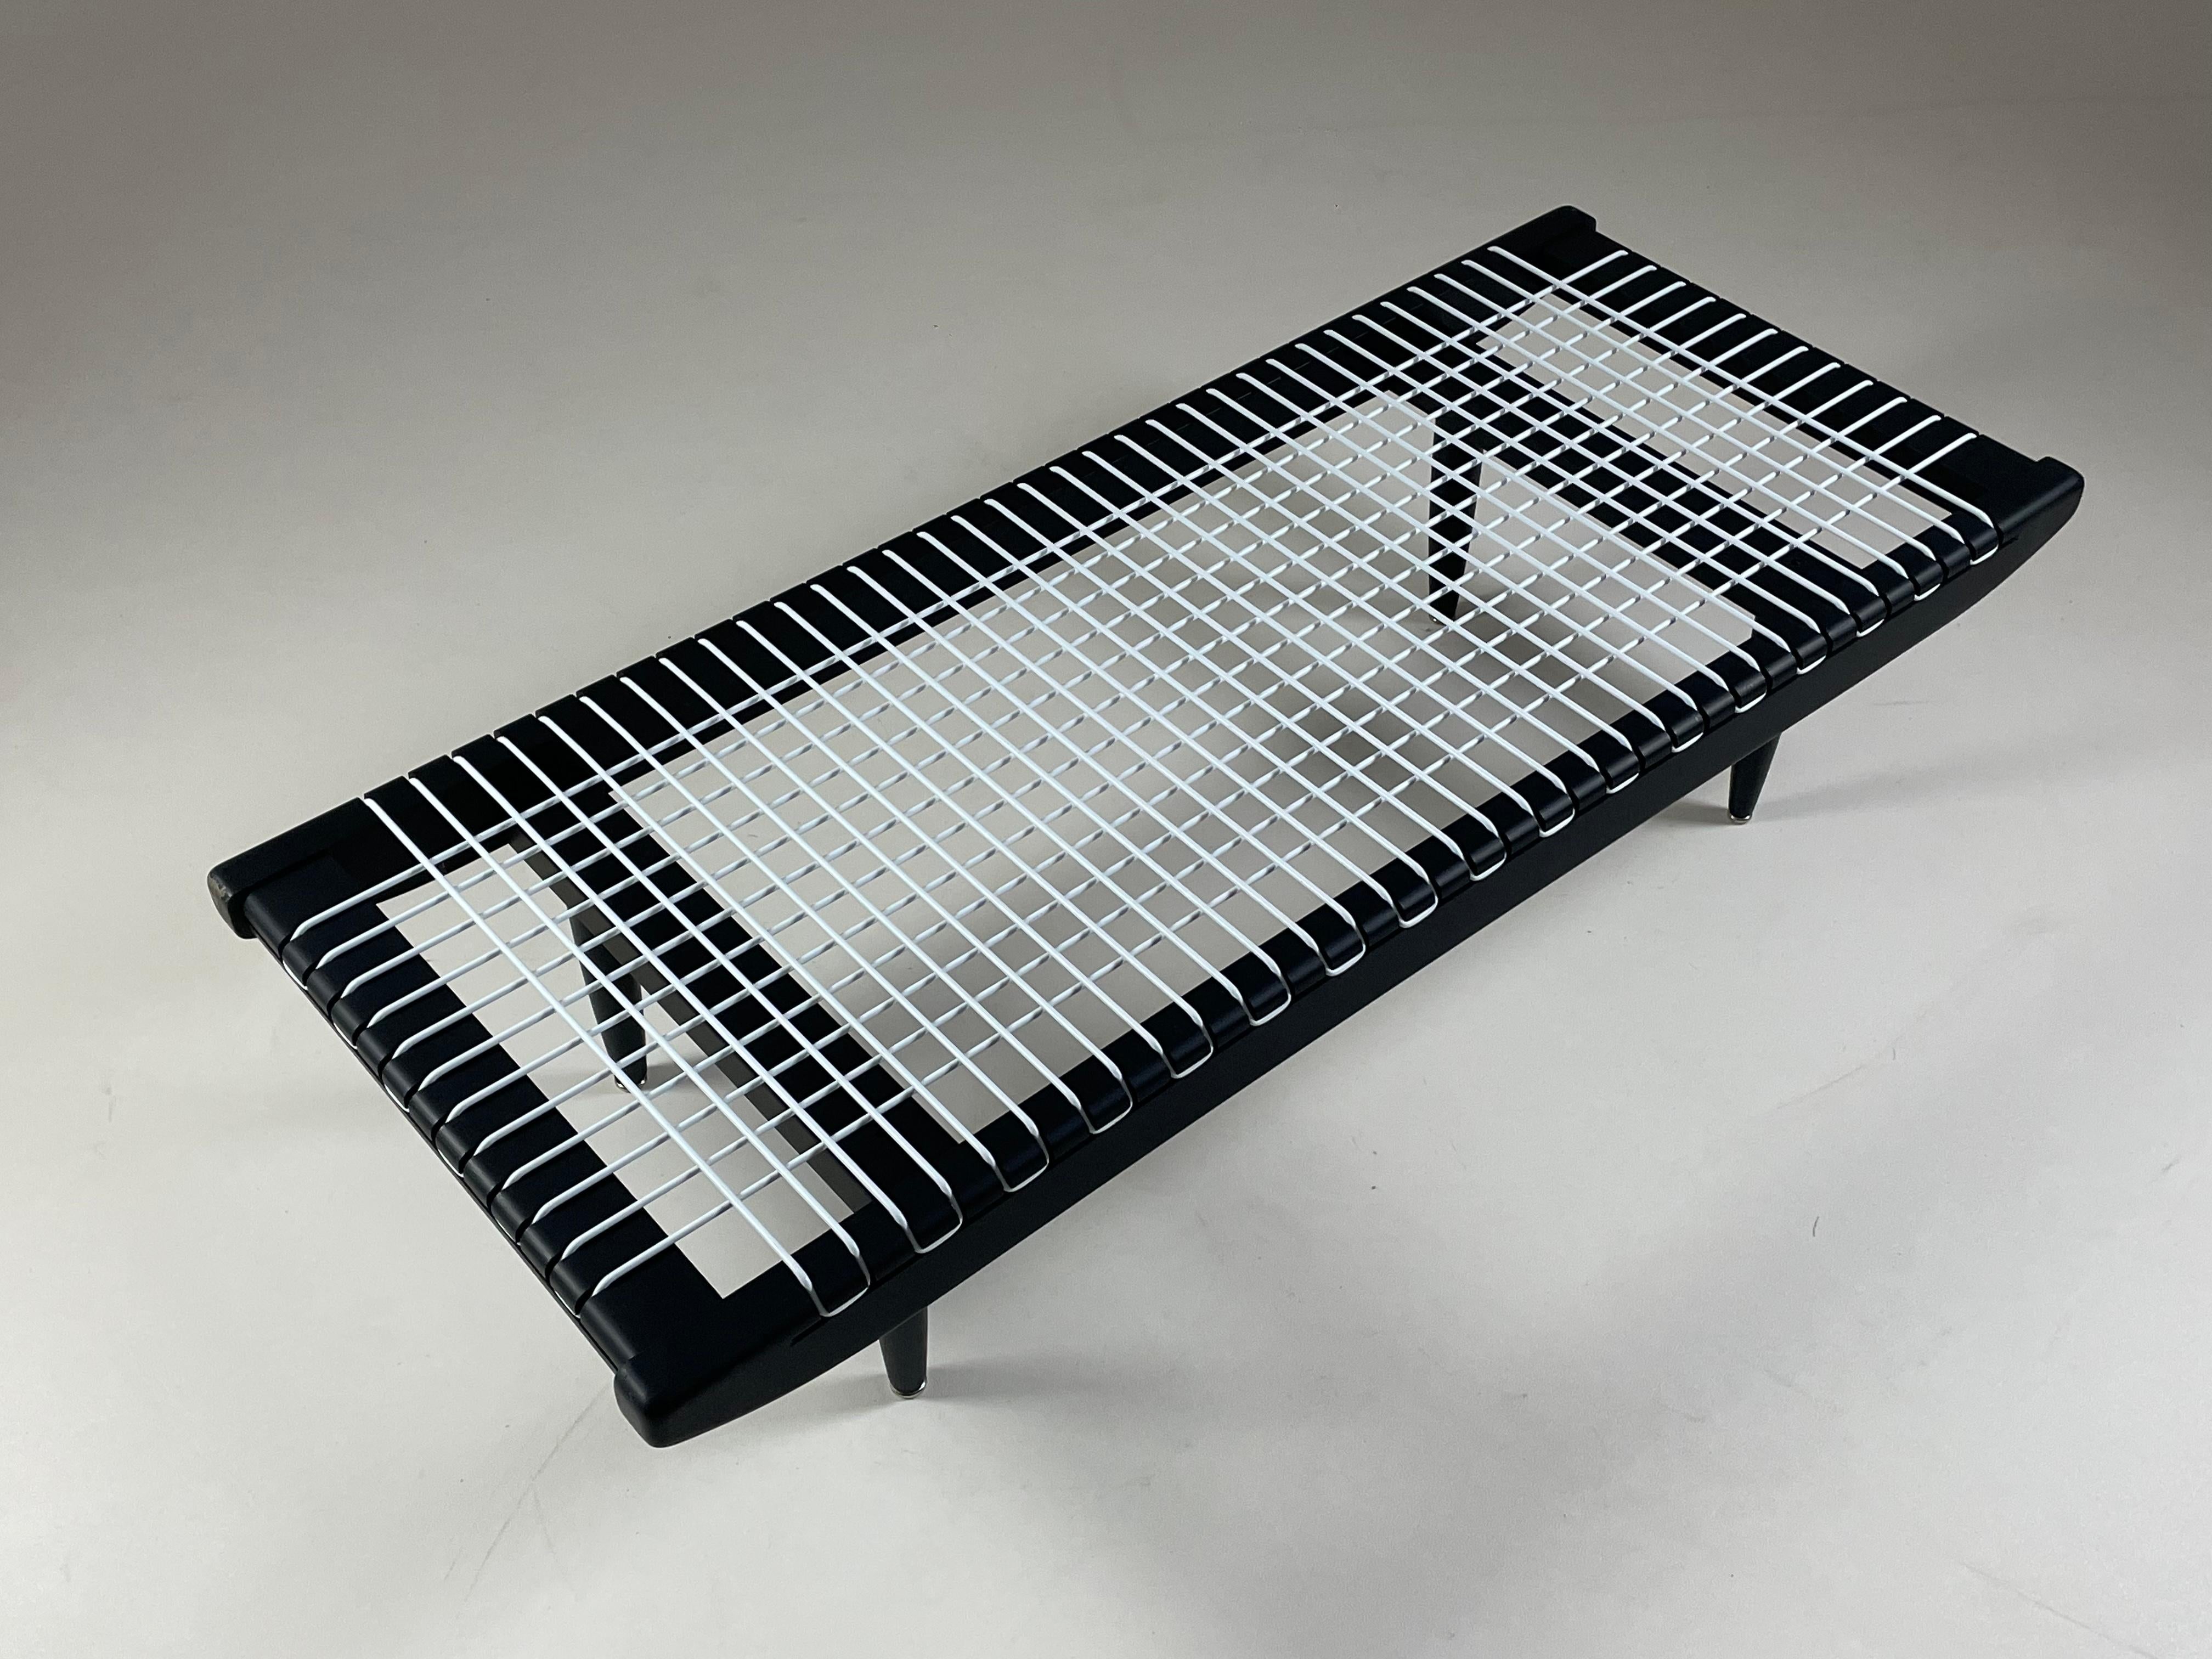 Coffee table by georges tigien from the 1960s. Structure in black lacquered beech and “prenas” plastic wire. Very good state of preservation. Possibility of placing a glass plate on top for a more functional use.